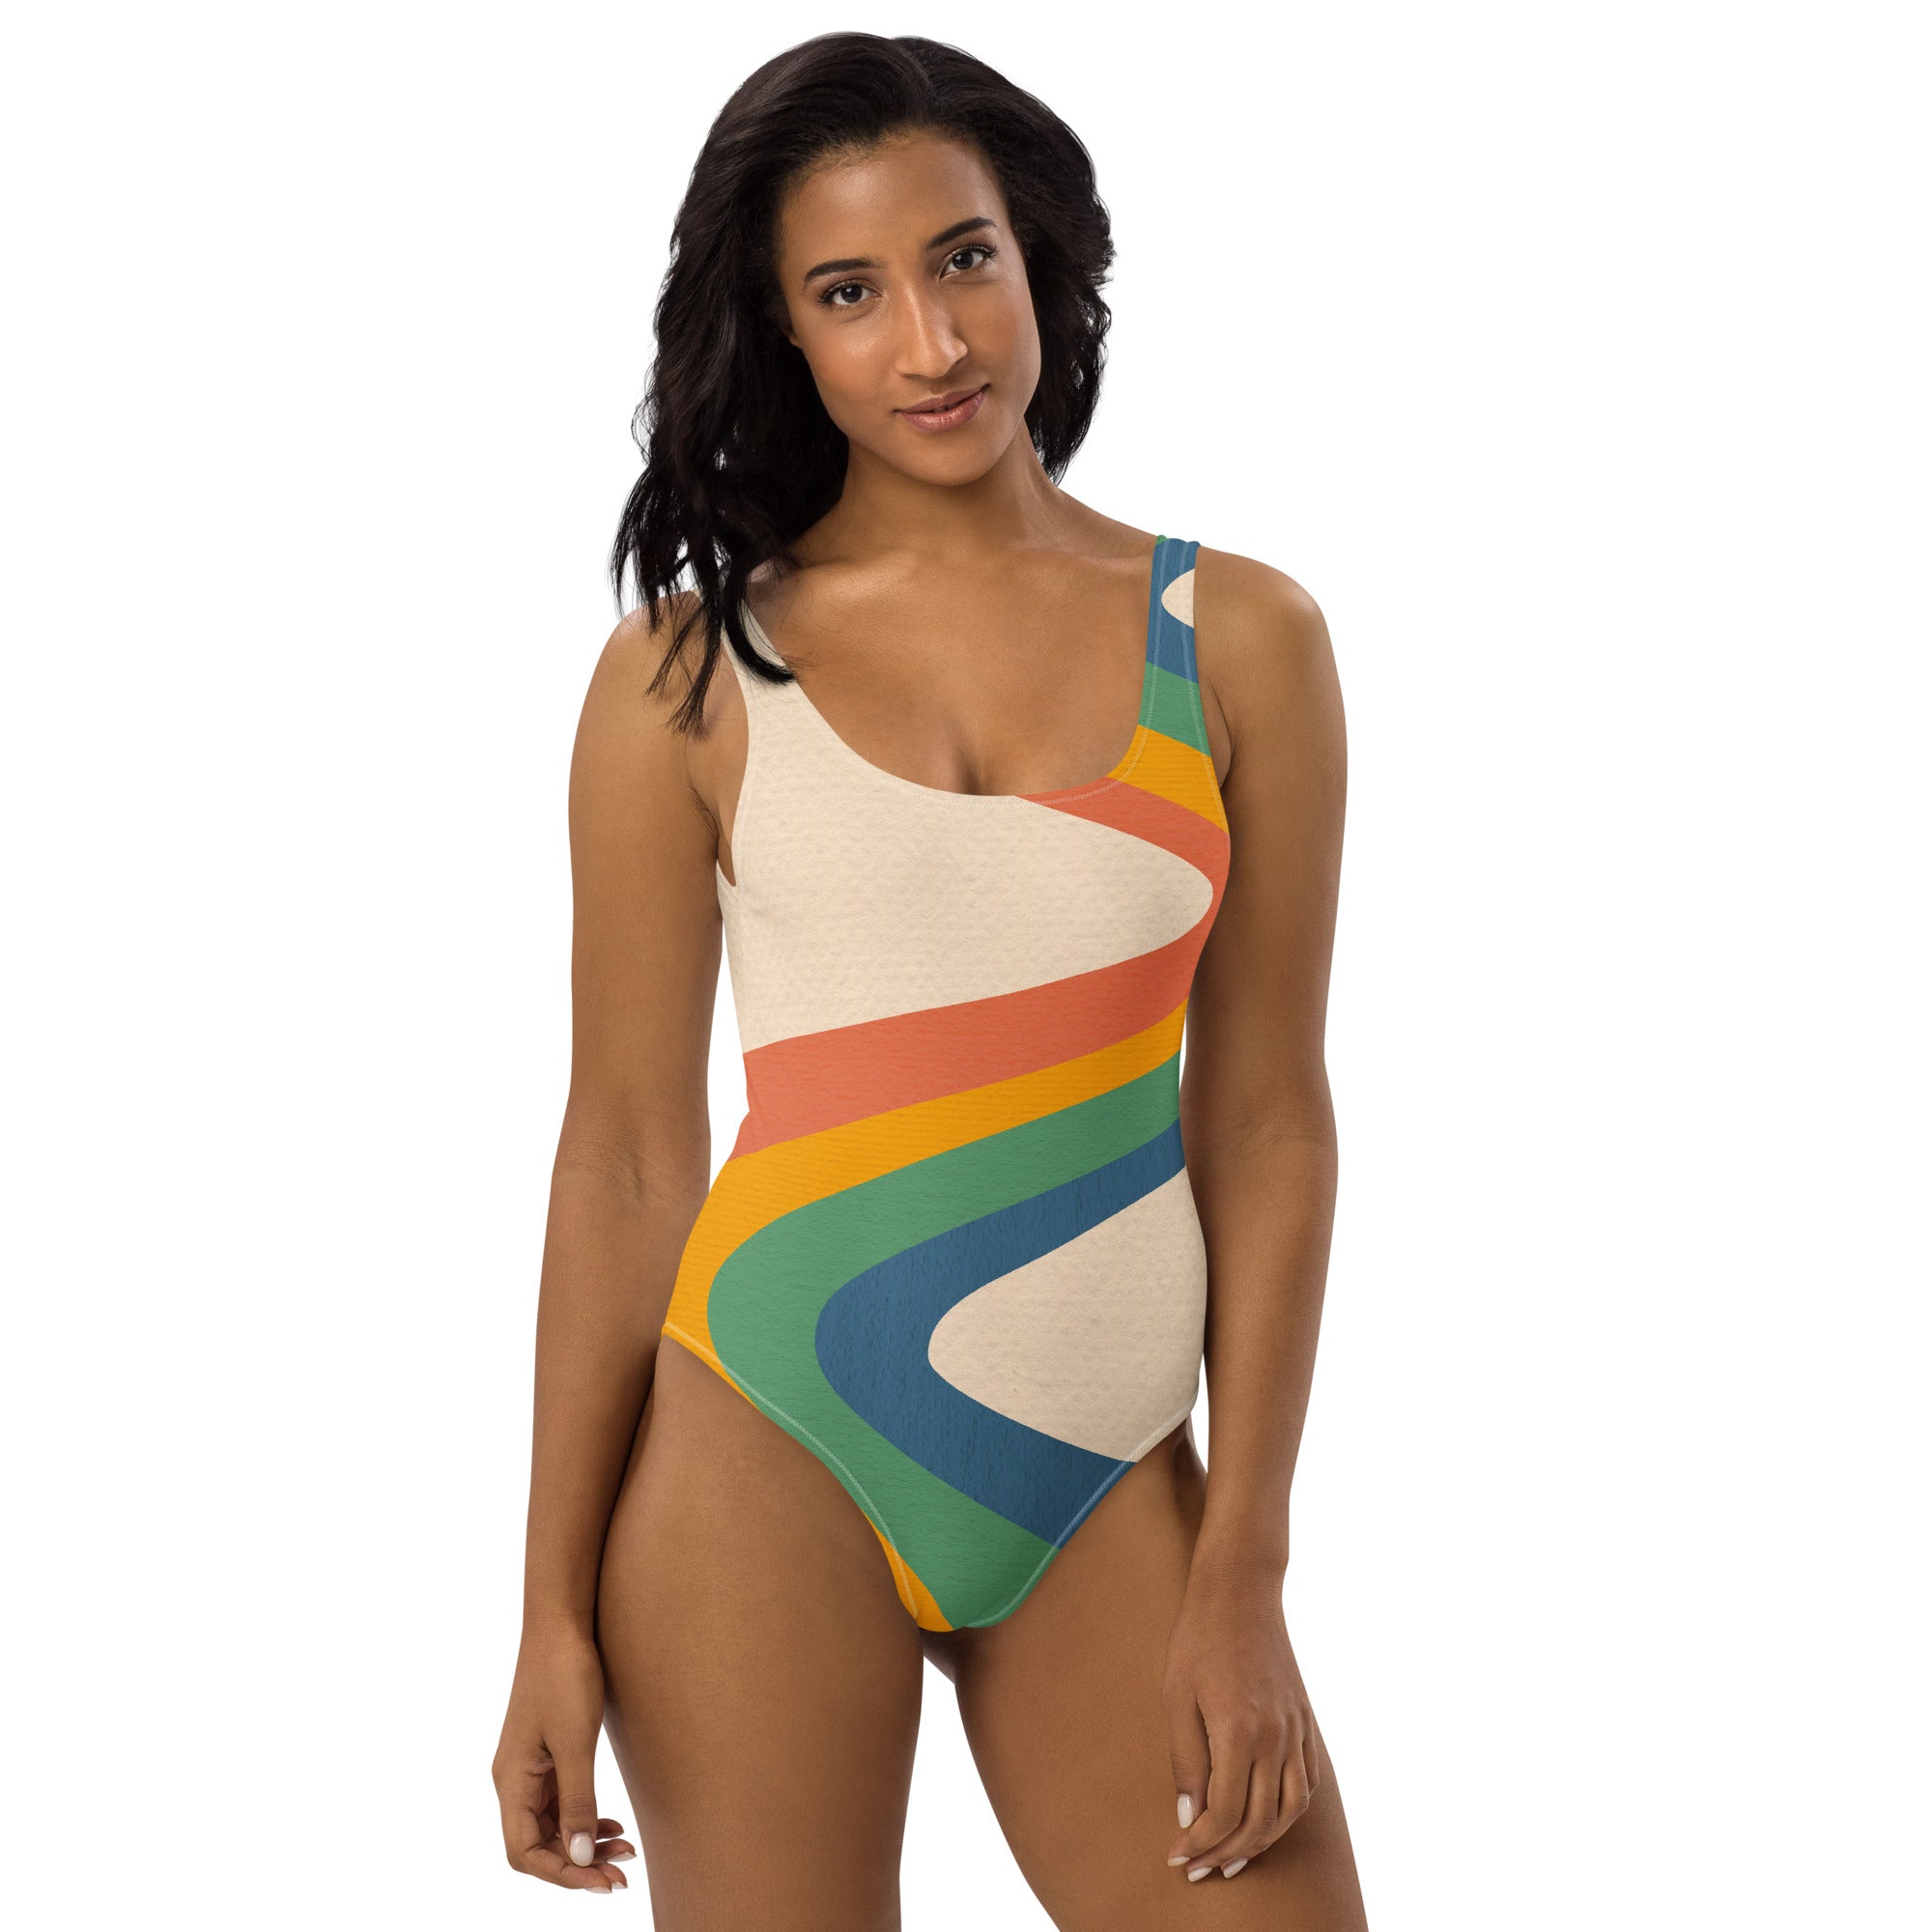 Call Me the Breeze One-Piece Swimsuit